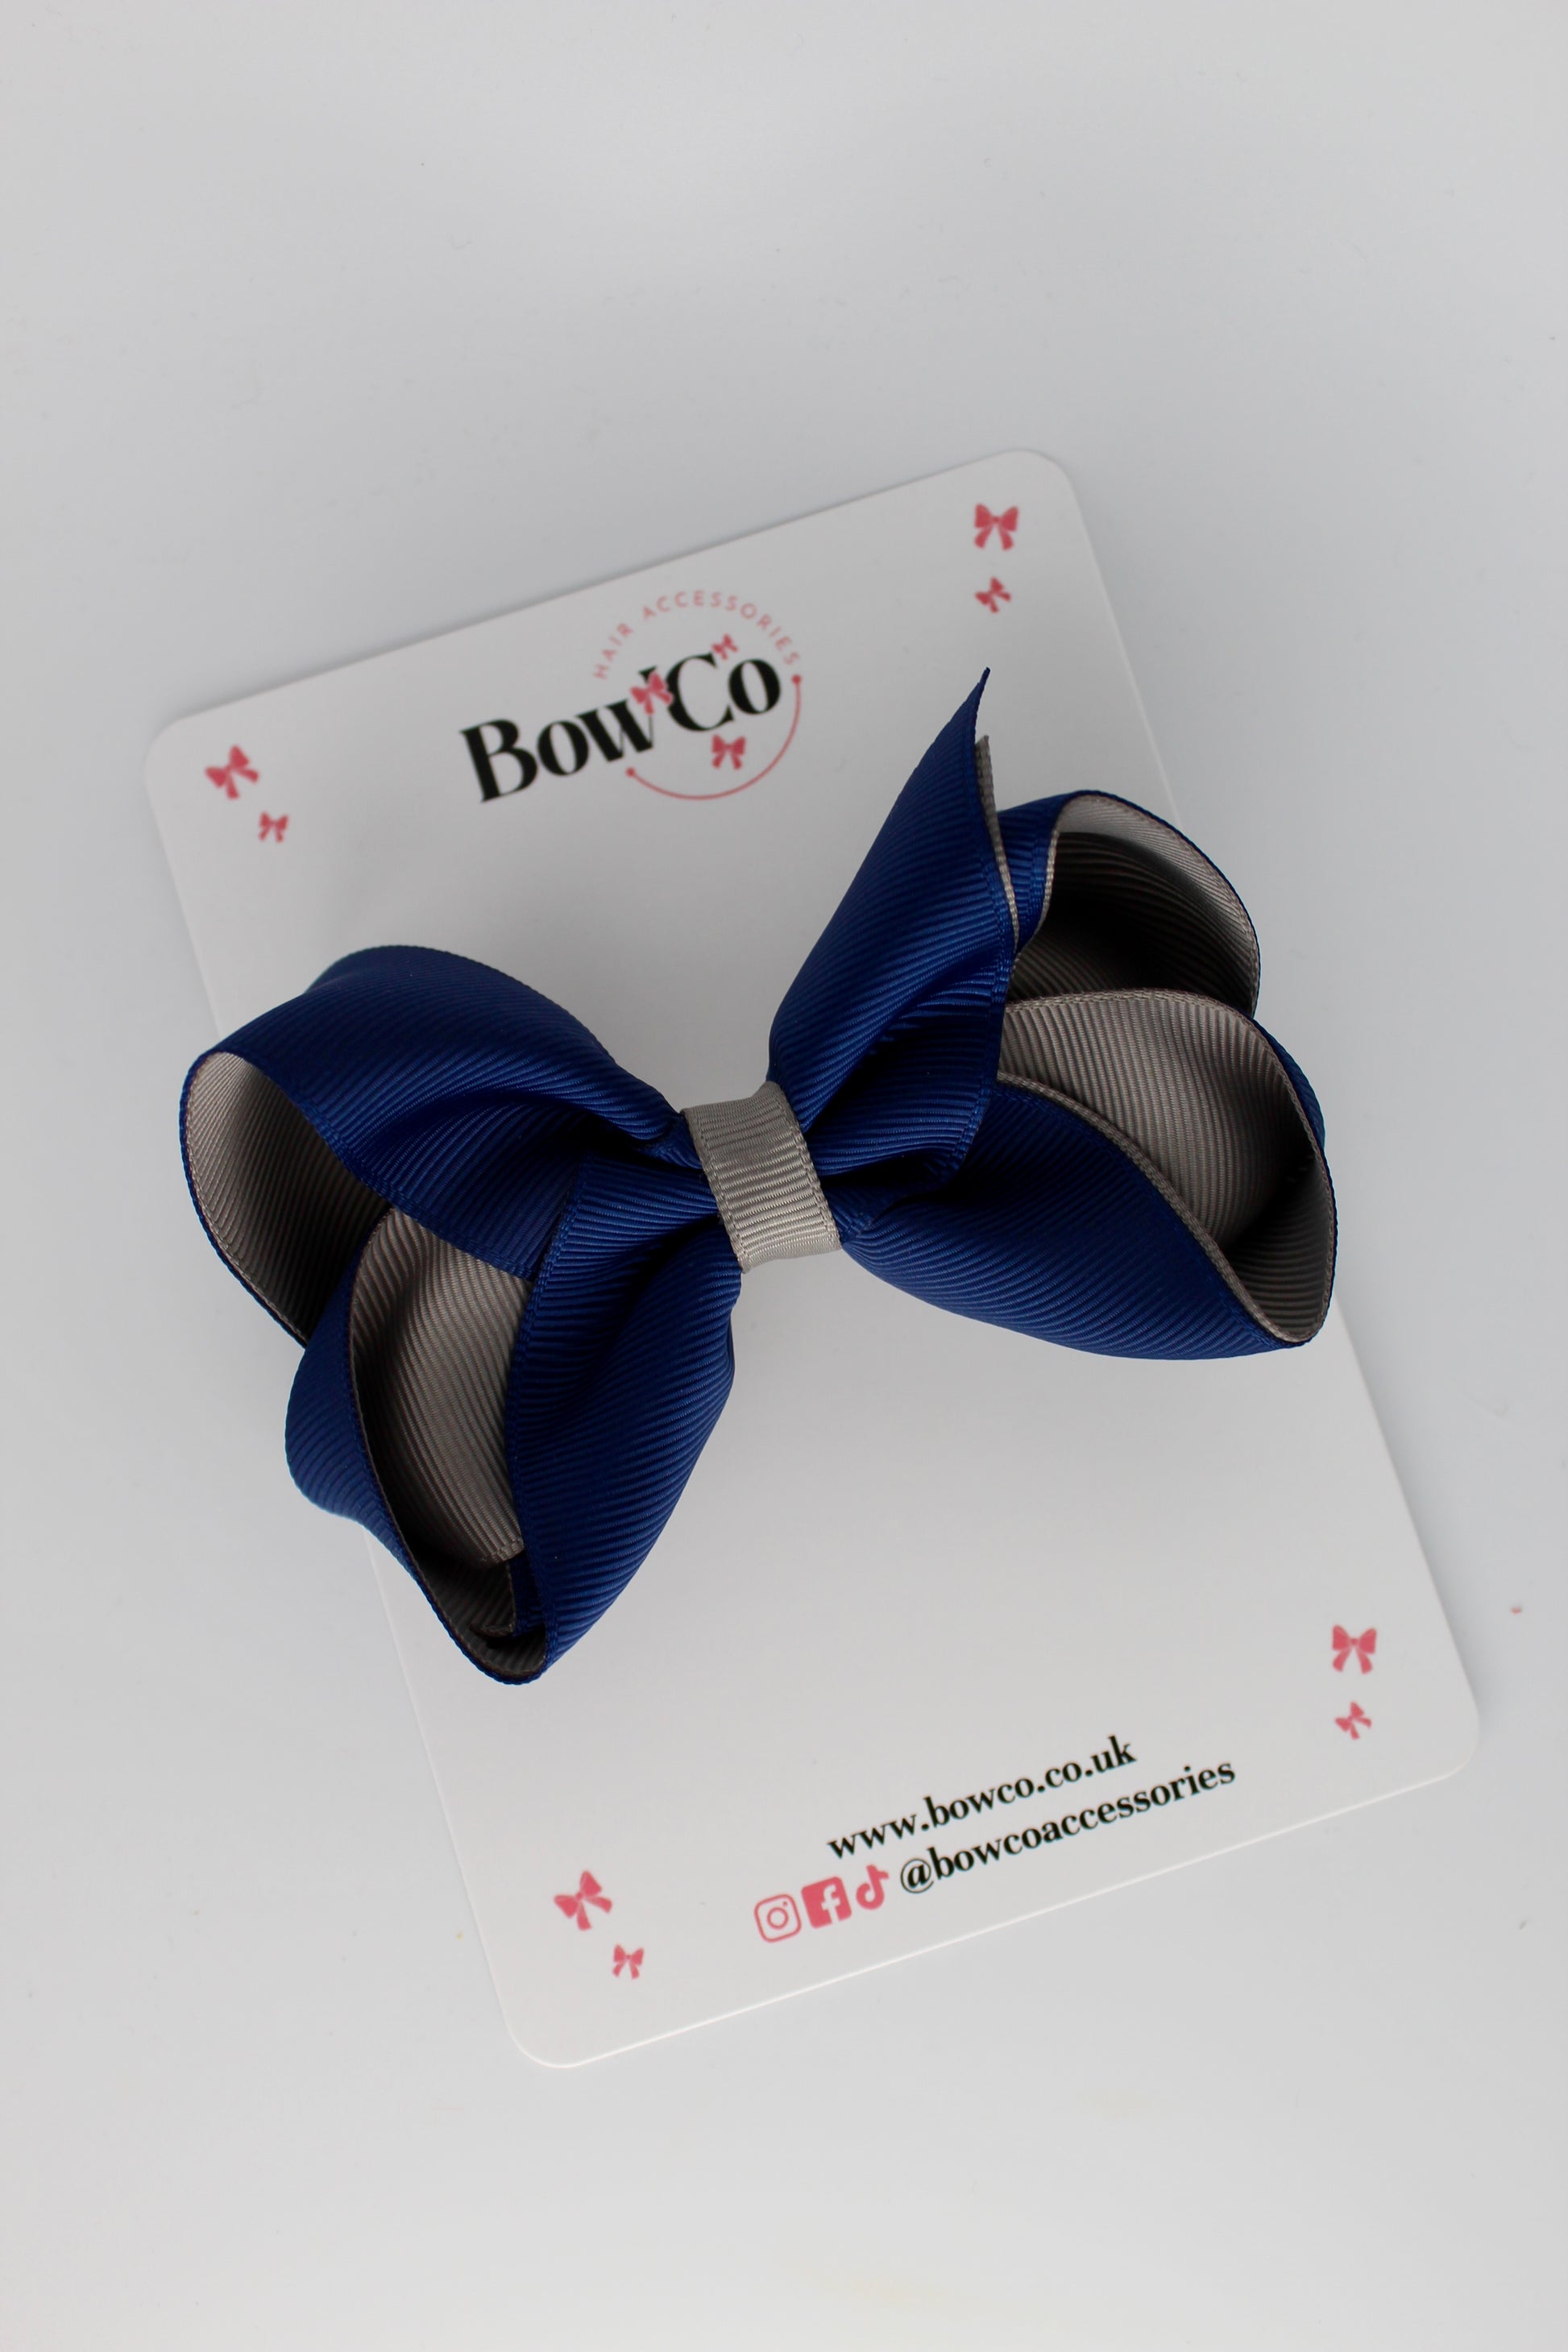 4 Inch Loop Bow - Clip - Navy Blue and Metal Grey